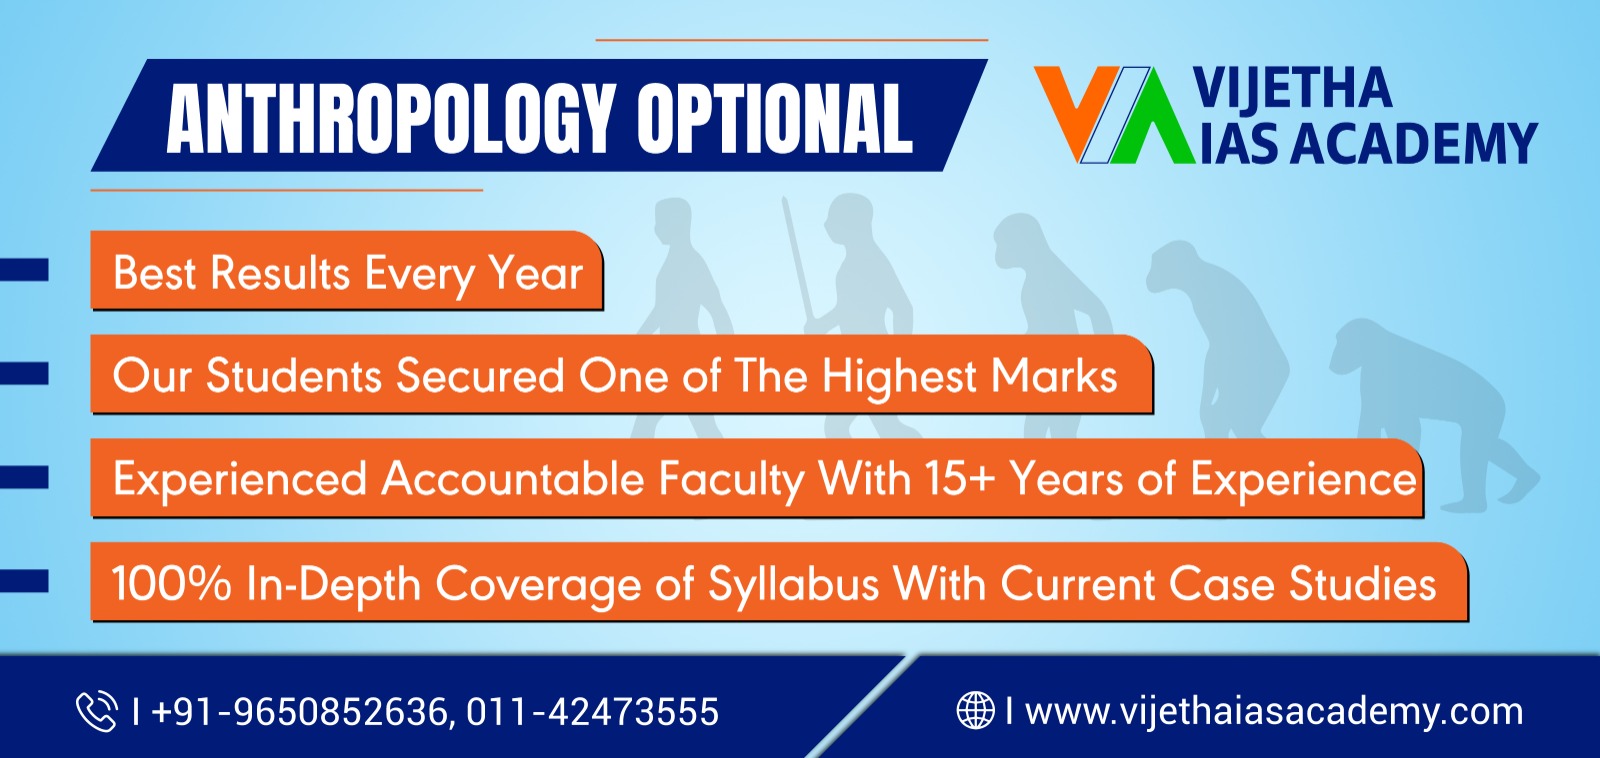 how to study anthropology for upsc | Best Anthropology Optional Coaching in India | Vijetha IAS Academy